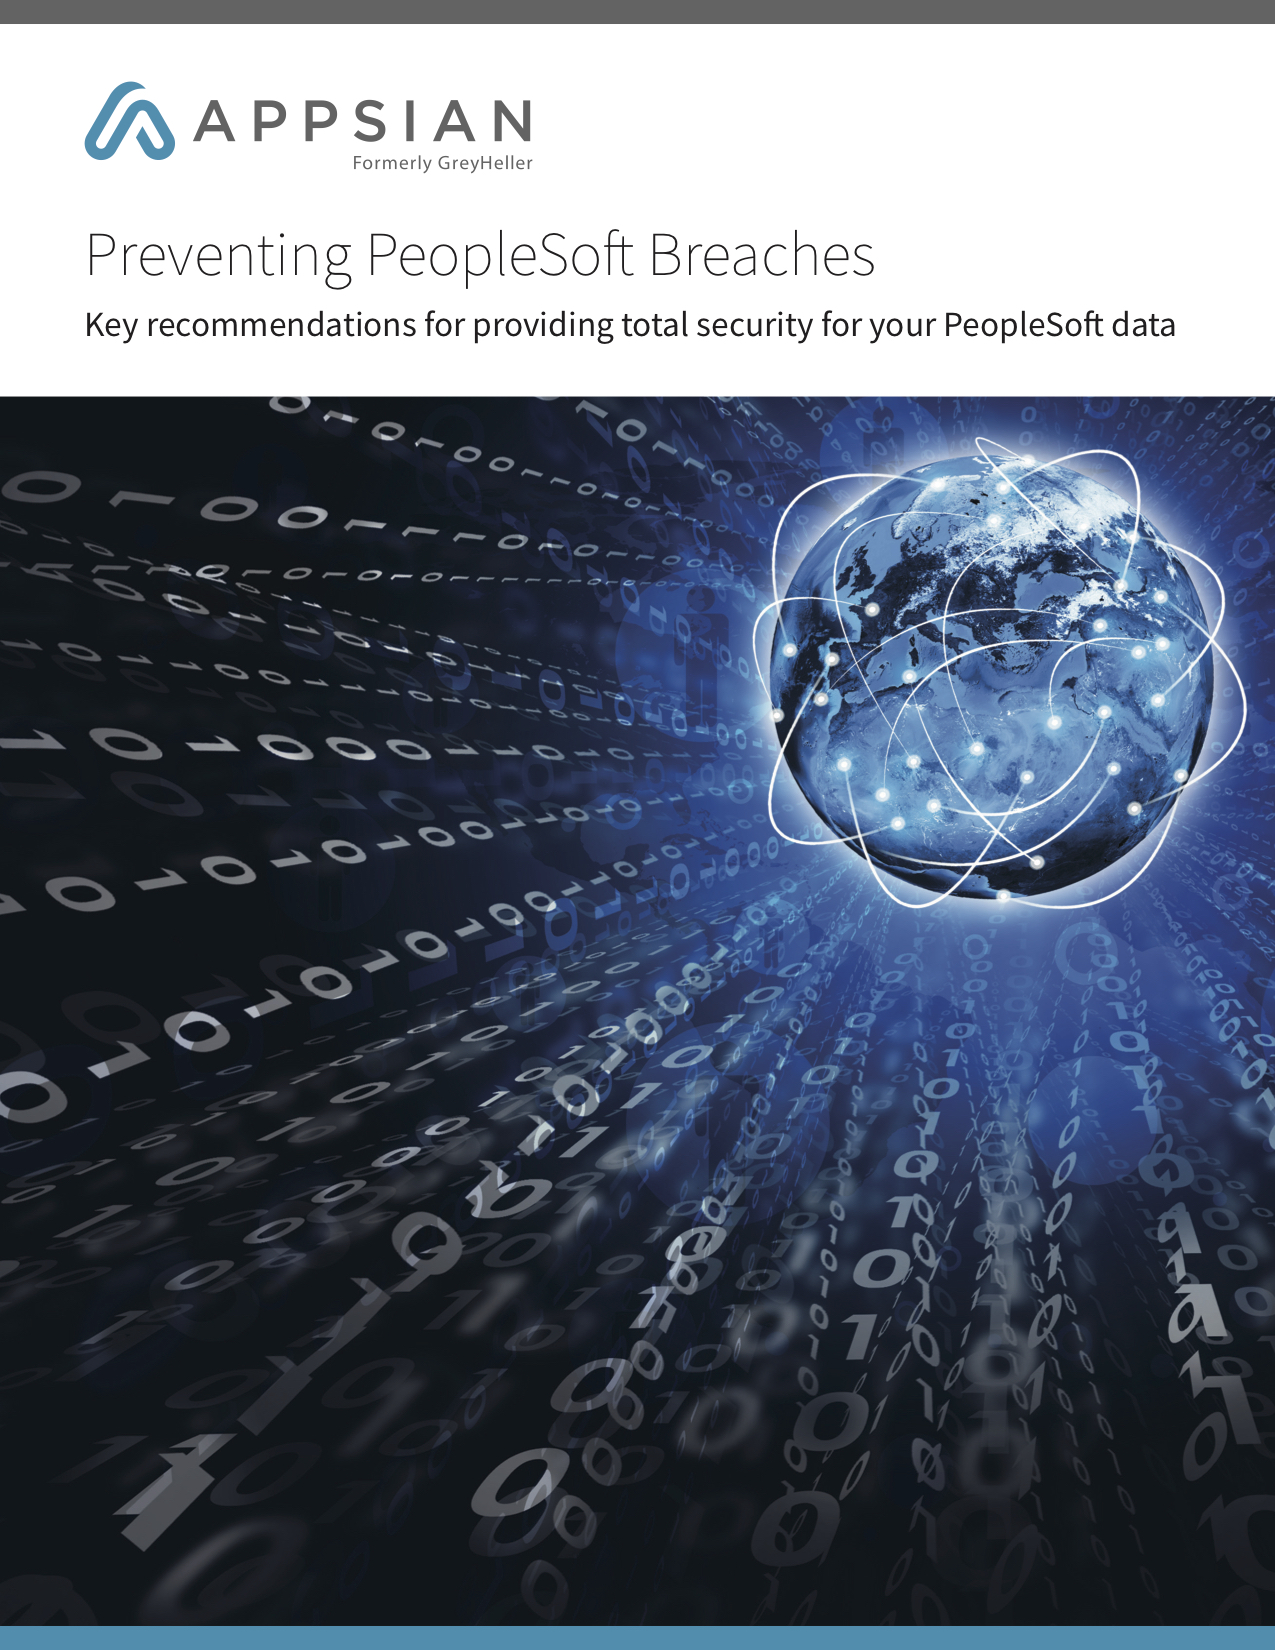 Preventing PeopleSoft Breaches